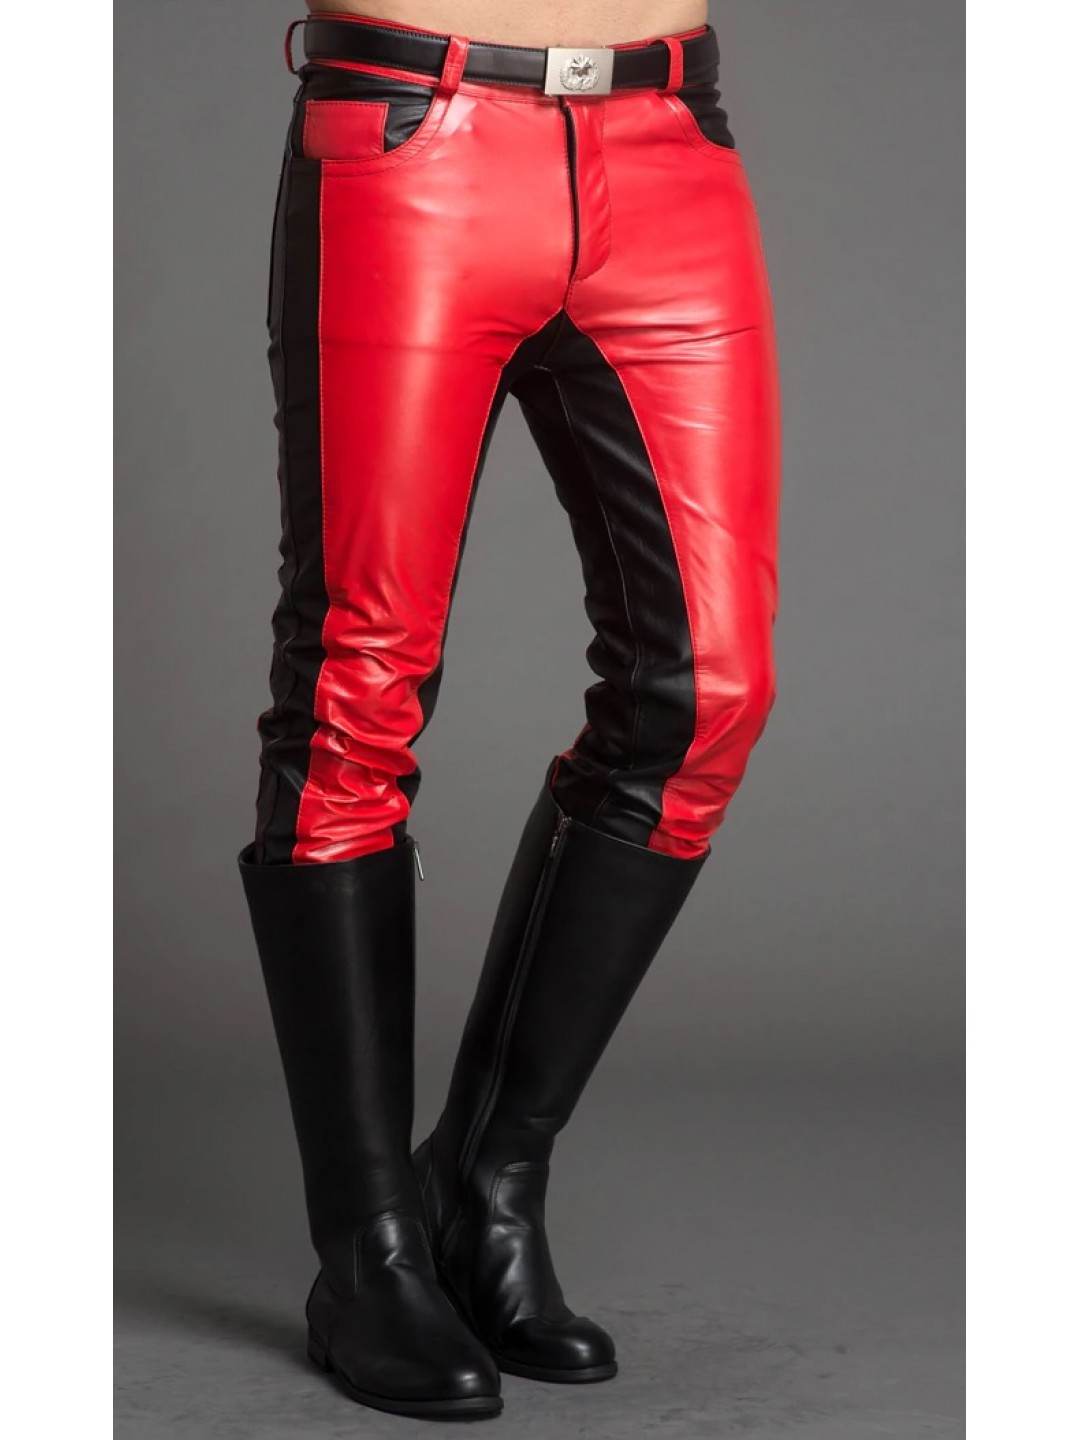 Men Fashion Contrast Color Genuine Black and Red Leather Pants